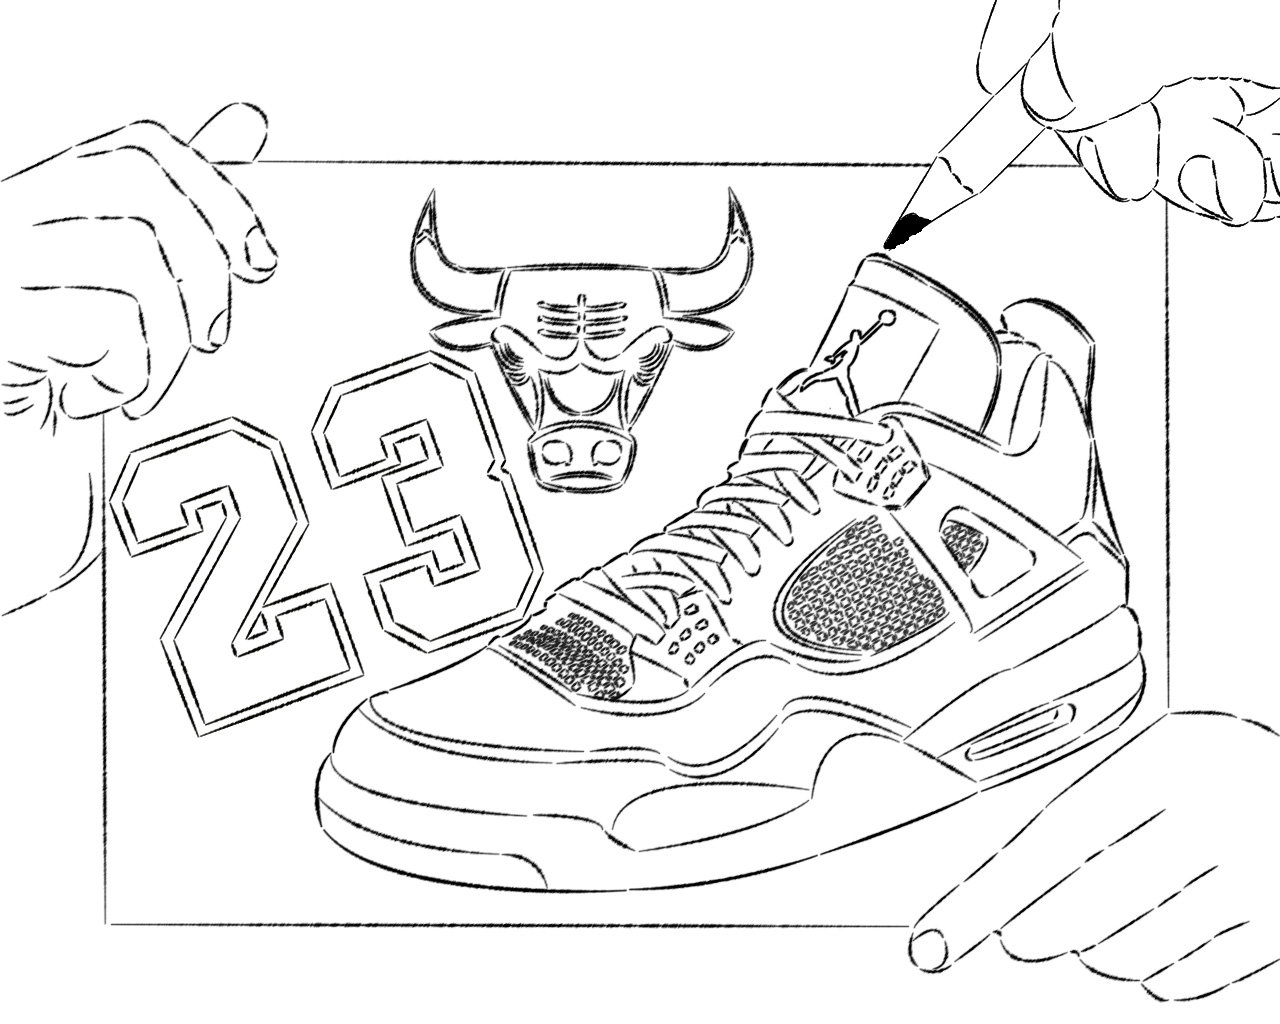 Basketball Shoes Coloring Pages ...